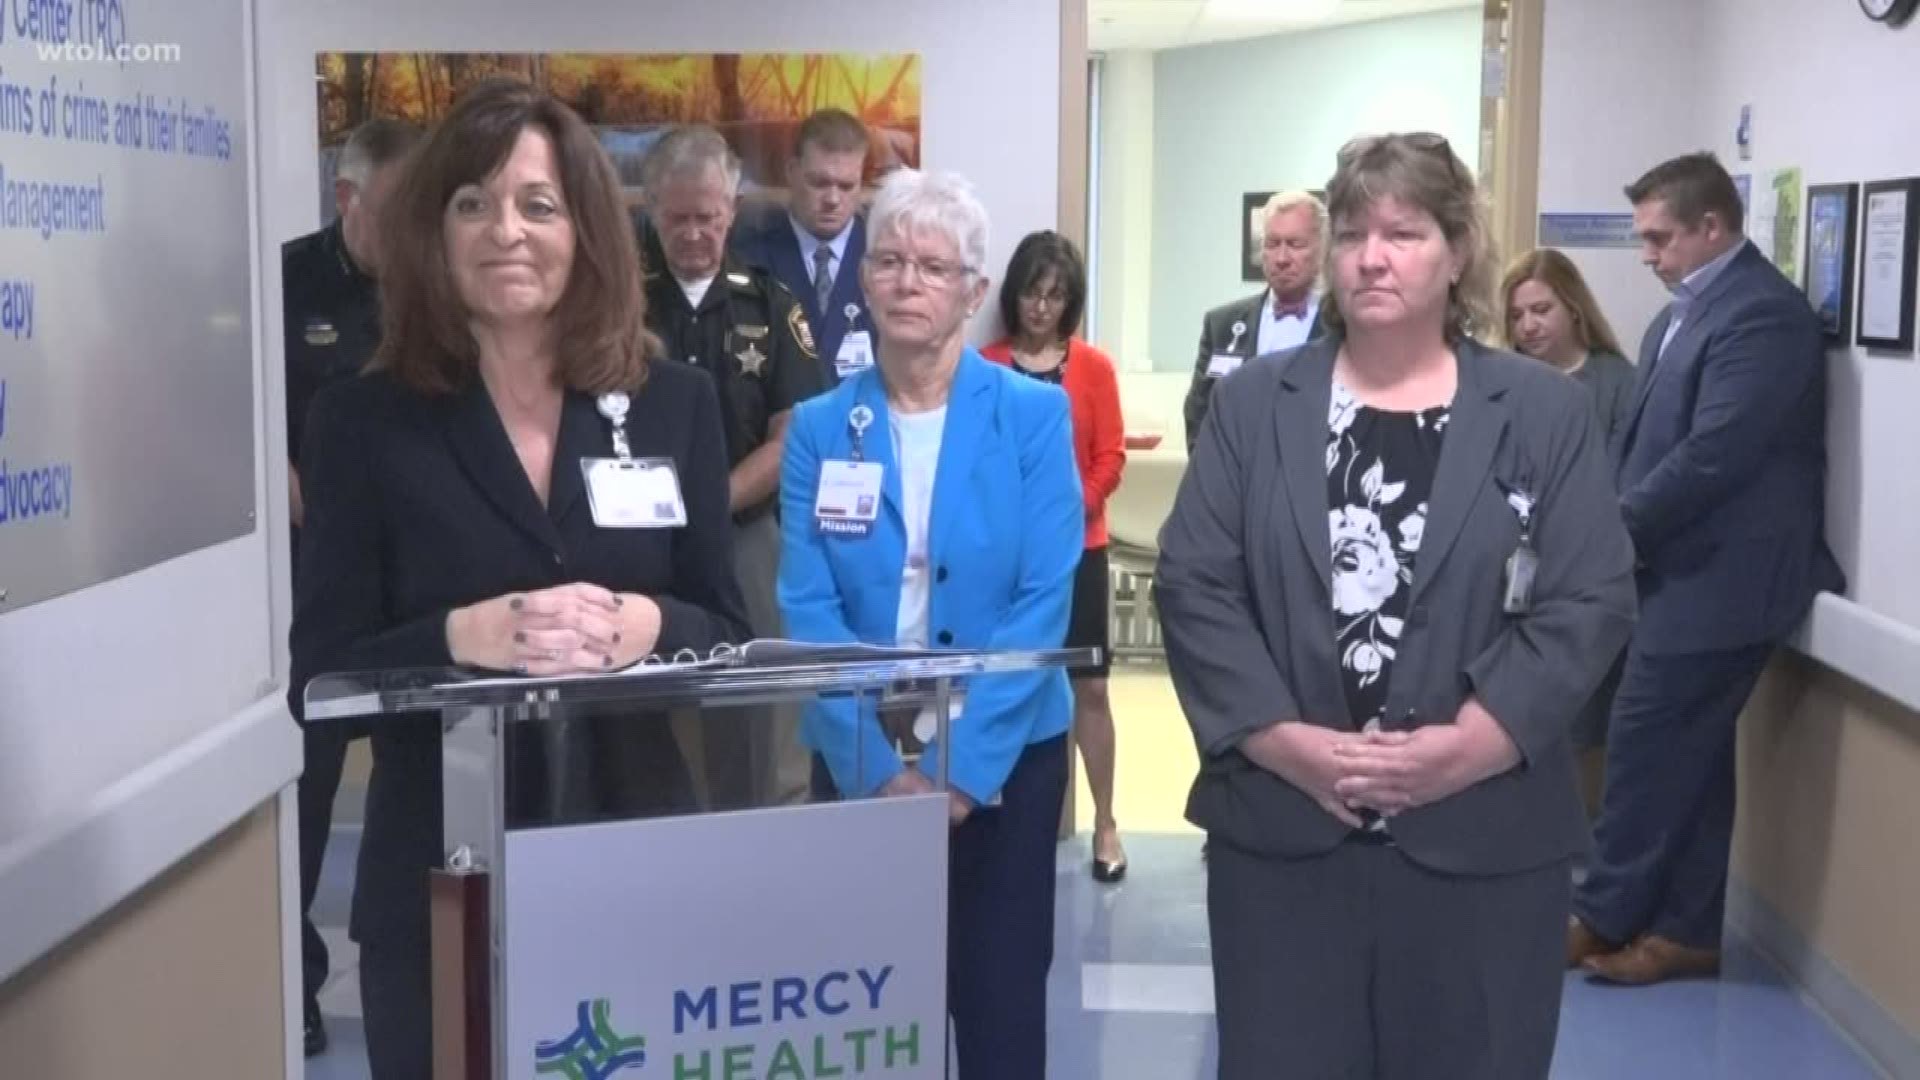 In 2018, Mercy Health - St. Vincent Medical Center was awarded a $600,000 grant from the Ohio Attorney General's Office to help victims of crime in the Toledo area.